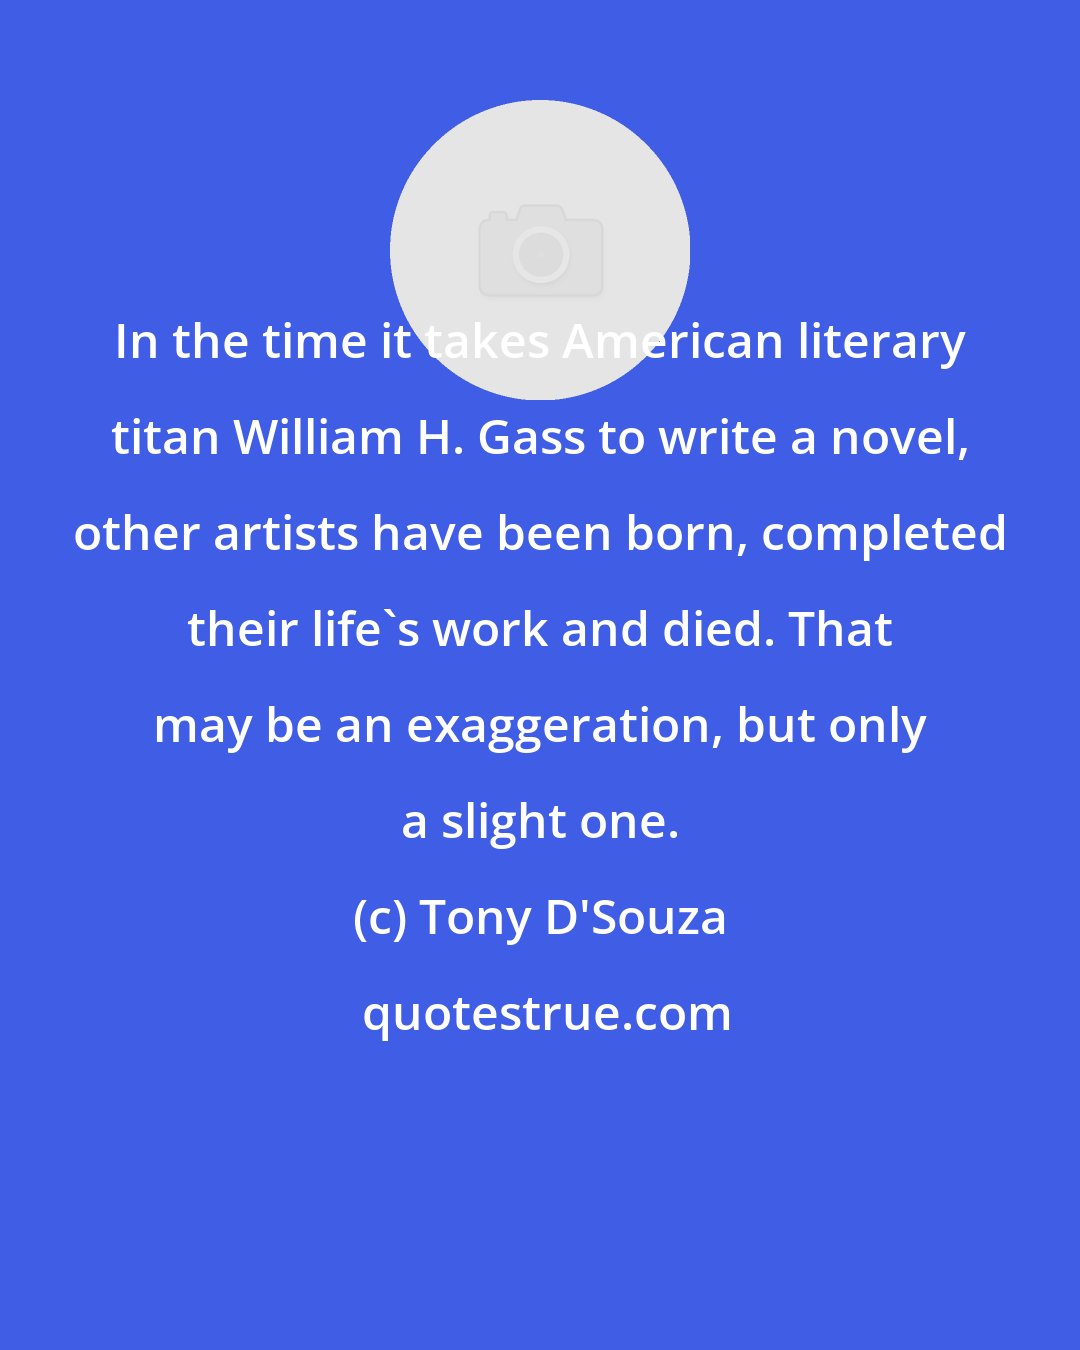 Tony D'Souza: In the time it takes American literary titan William H. Gass to write a novel, other artists have been born, completed their life's work and died. That may be an exaggeration, but only a slight one.